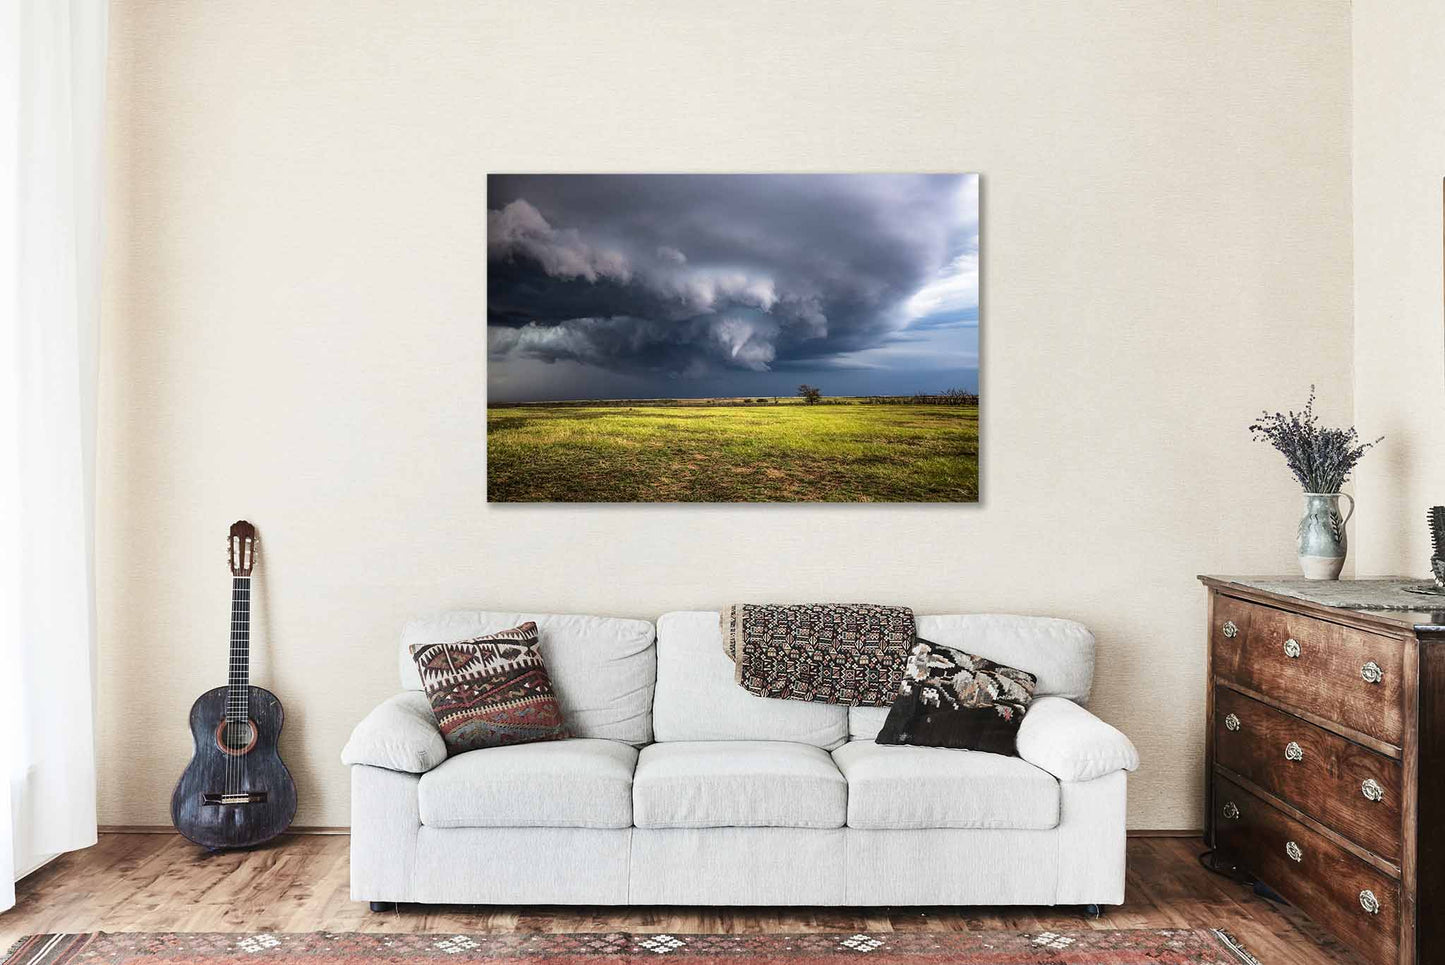 Storm Wall Art (Ready to Hang) Metal Print of Thunderstorm with Funnel Cloud on Stormy Day in Oklahoma Tornado Photography Weather Decor